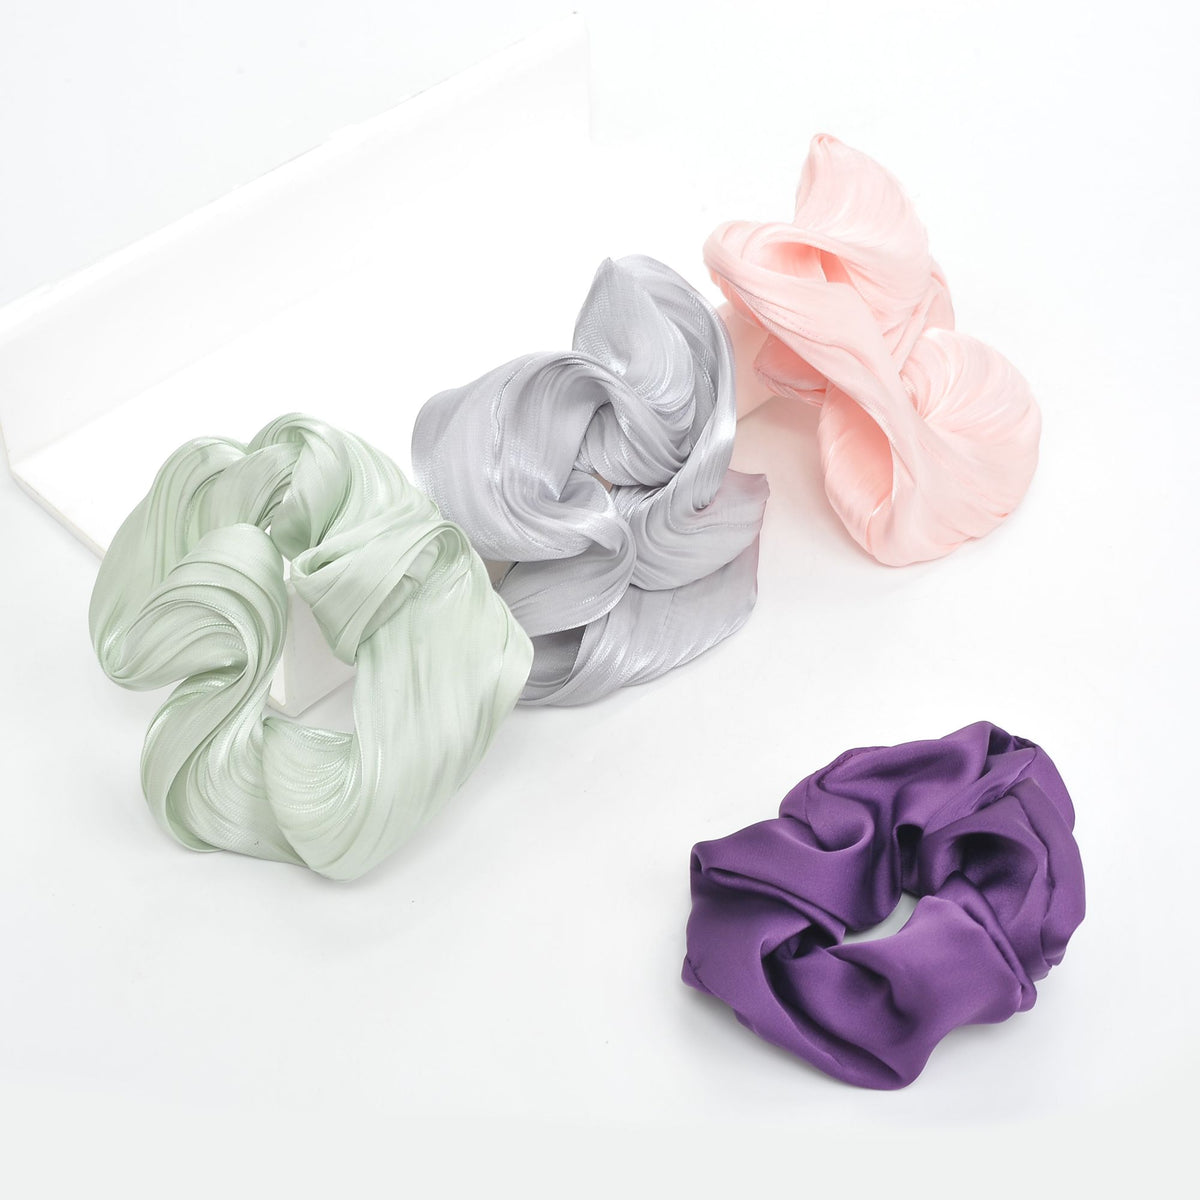 Urban Expressions Scrunchie - Assorted 4 Pack Accessories : Hair Accessories : Scrunchie 818209014366 | Grey Purple Light Green Light Pink